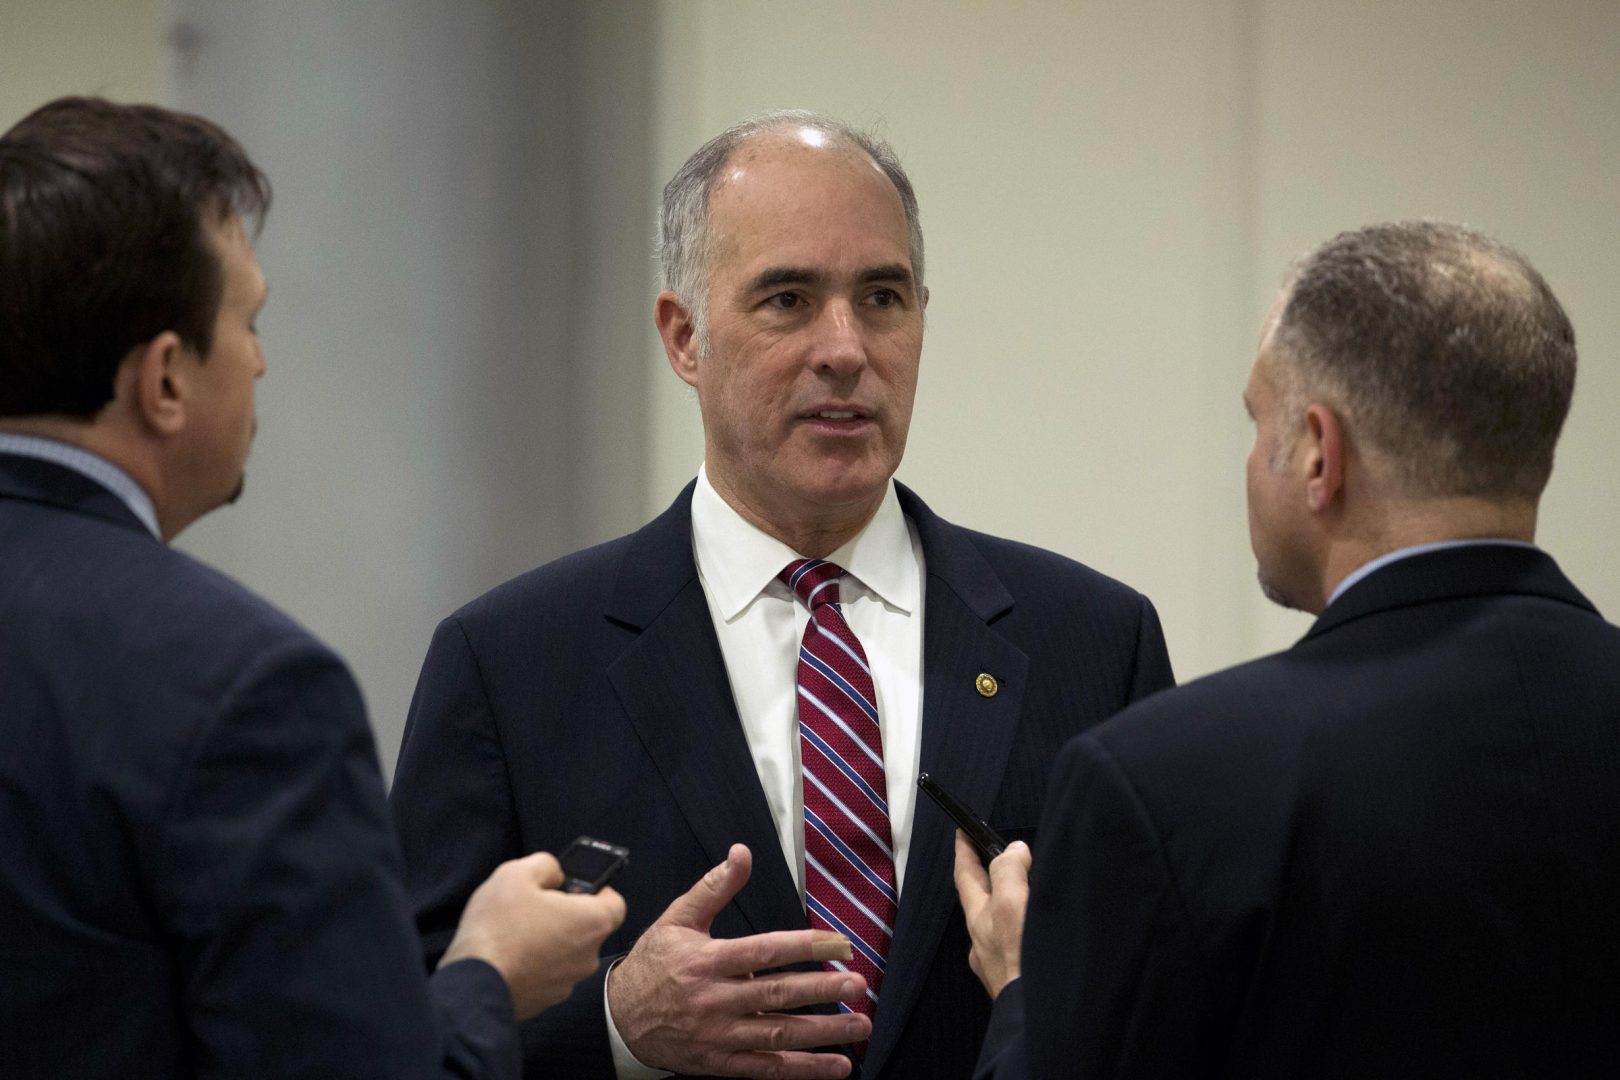 Sen. Bob Casey, D-Pa., talks to reporters on Capitol Hill in Washington, Tuesday, Jan. 21, 2020.